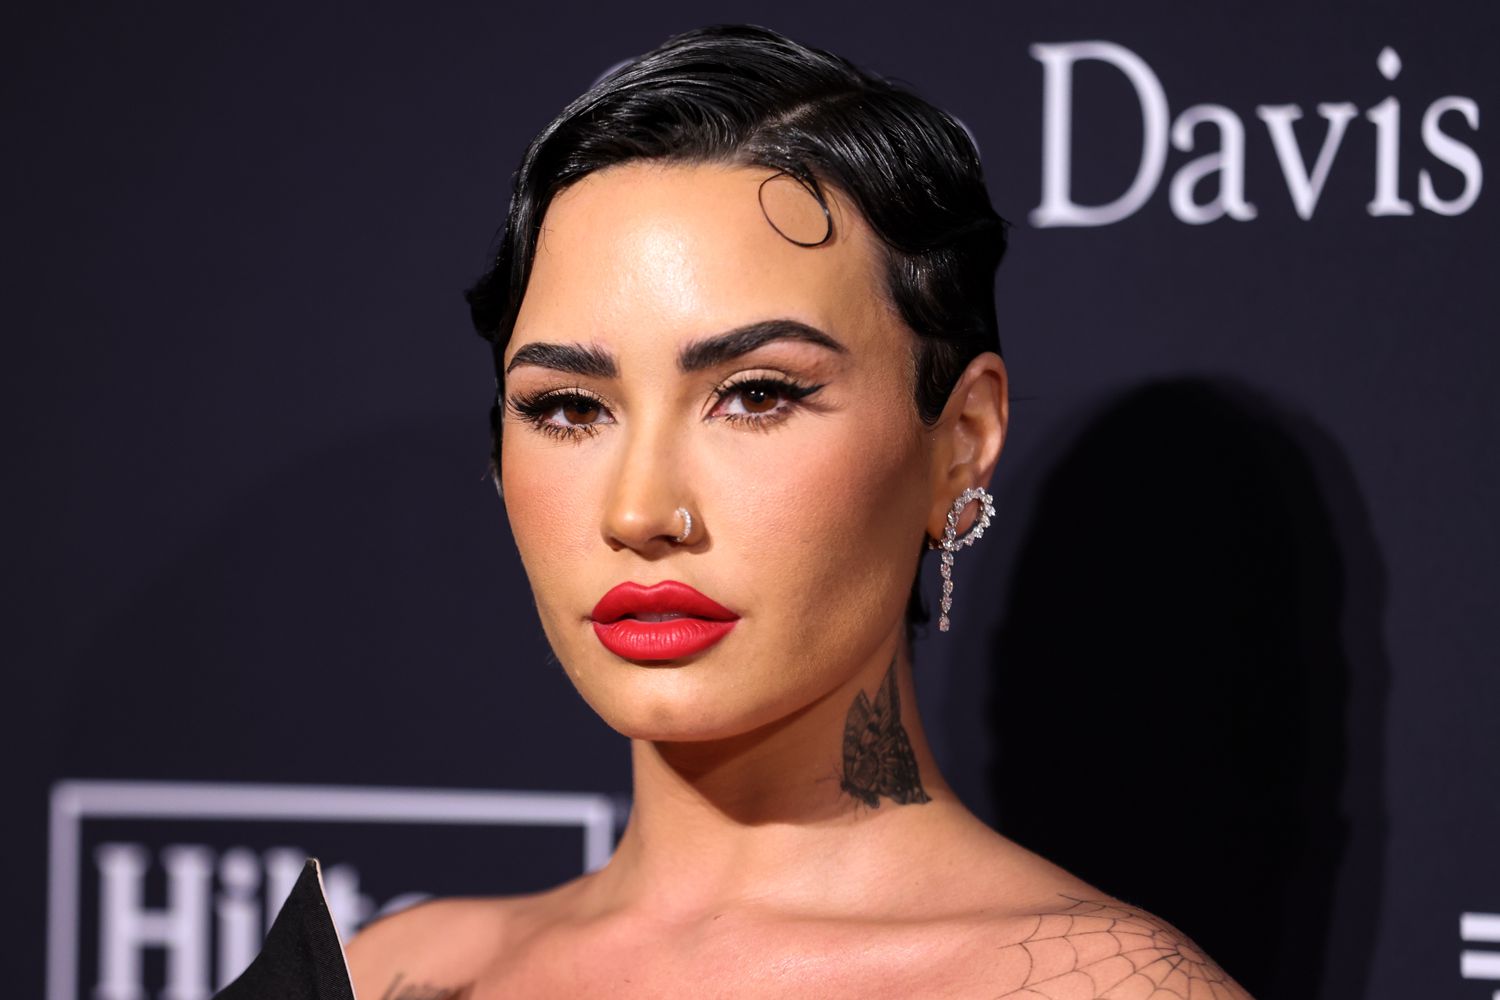 caryn marcus recommends demi lovato sex story pic